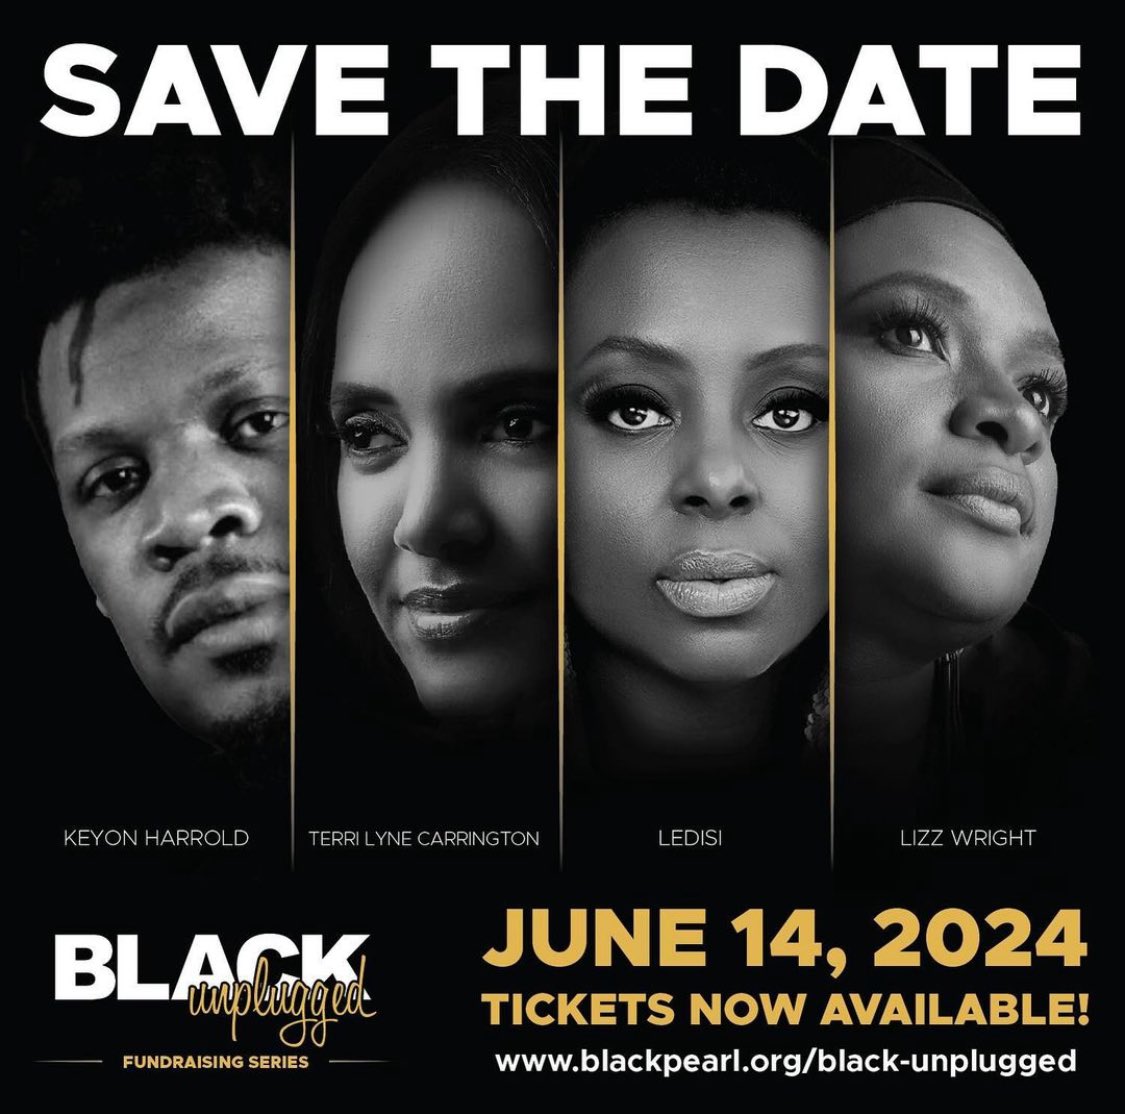 Chicago Fam! Black Unplugged is happening on June 14 at Little Black Pearl. I’m looking forward to performing together in concert with @keyonharrold @ledisi and Terri Lyne Carrington! More info + tickets: blackpearl.org/black-unplugged